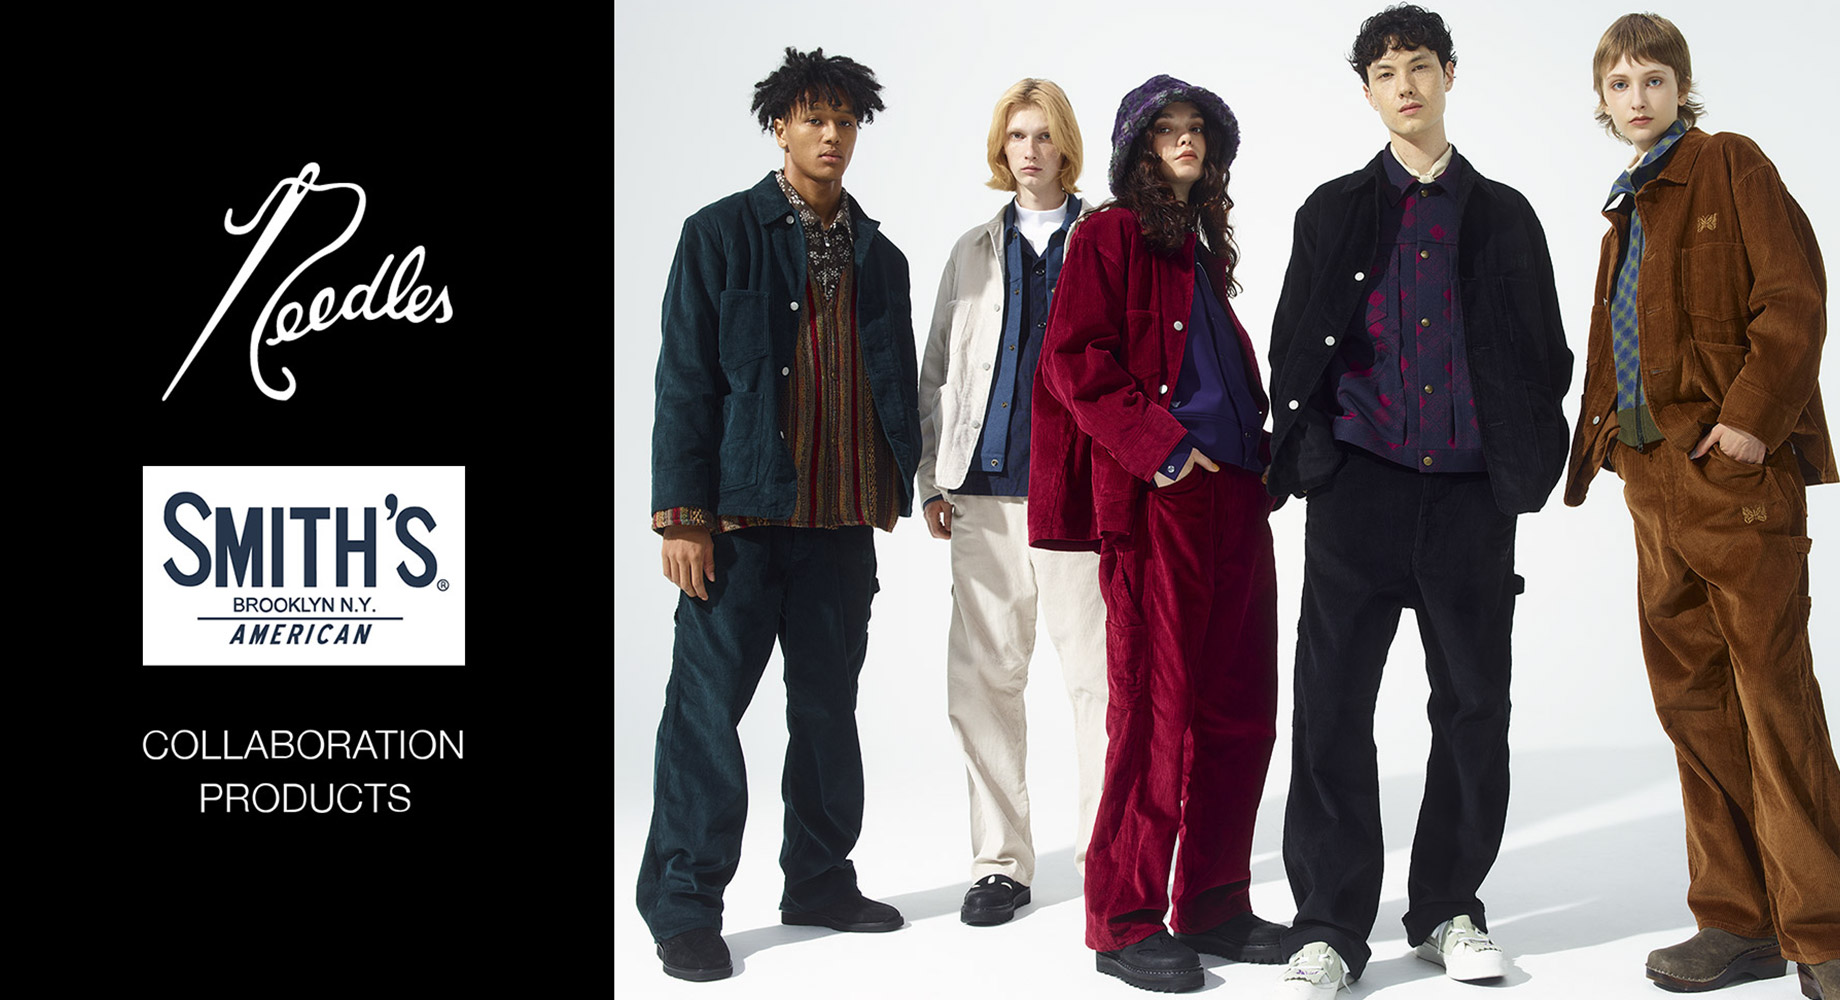 〈NEEDLES〉x〈SMITH'S〉COLLABORATION PRODUCTS 2022 FALL WINTER COLLECTION 9.24（SAT）11:00 JST - ON SALE